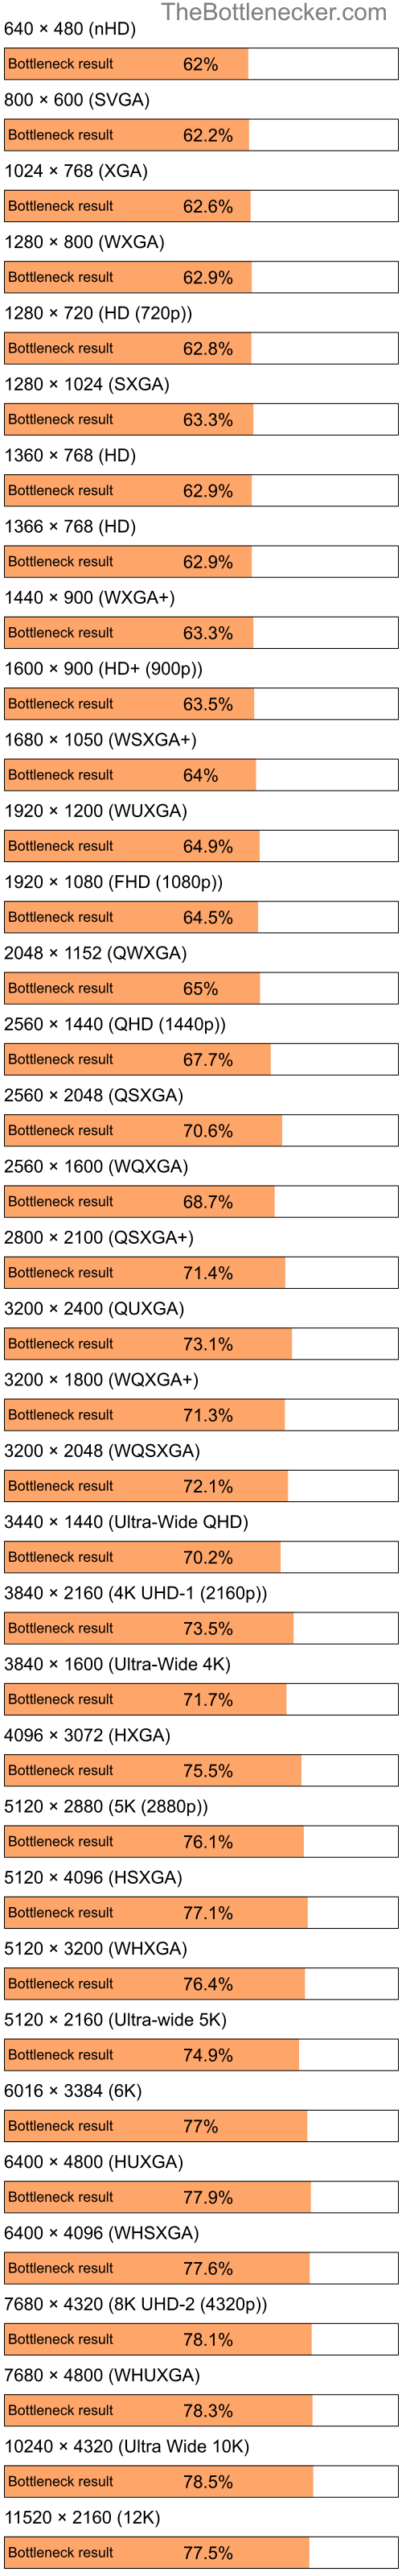 Bottleneck results by resolution for Intel Pentium 4 and NVIDIA GeForce 9400M in General Tasks